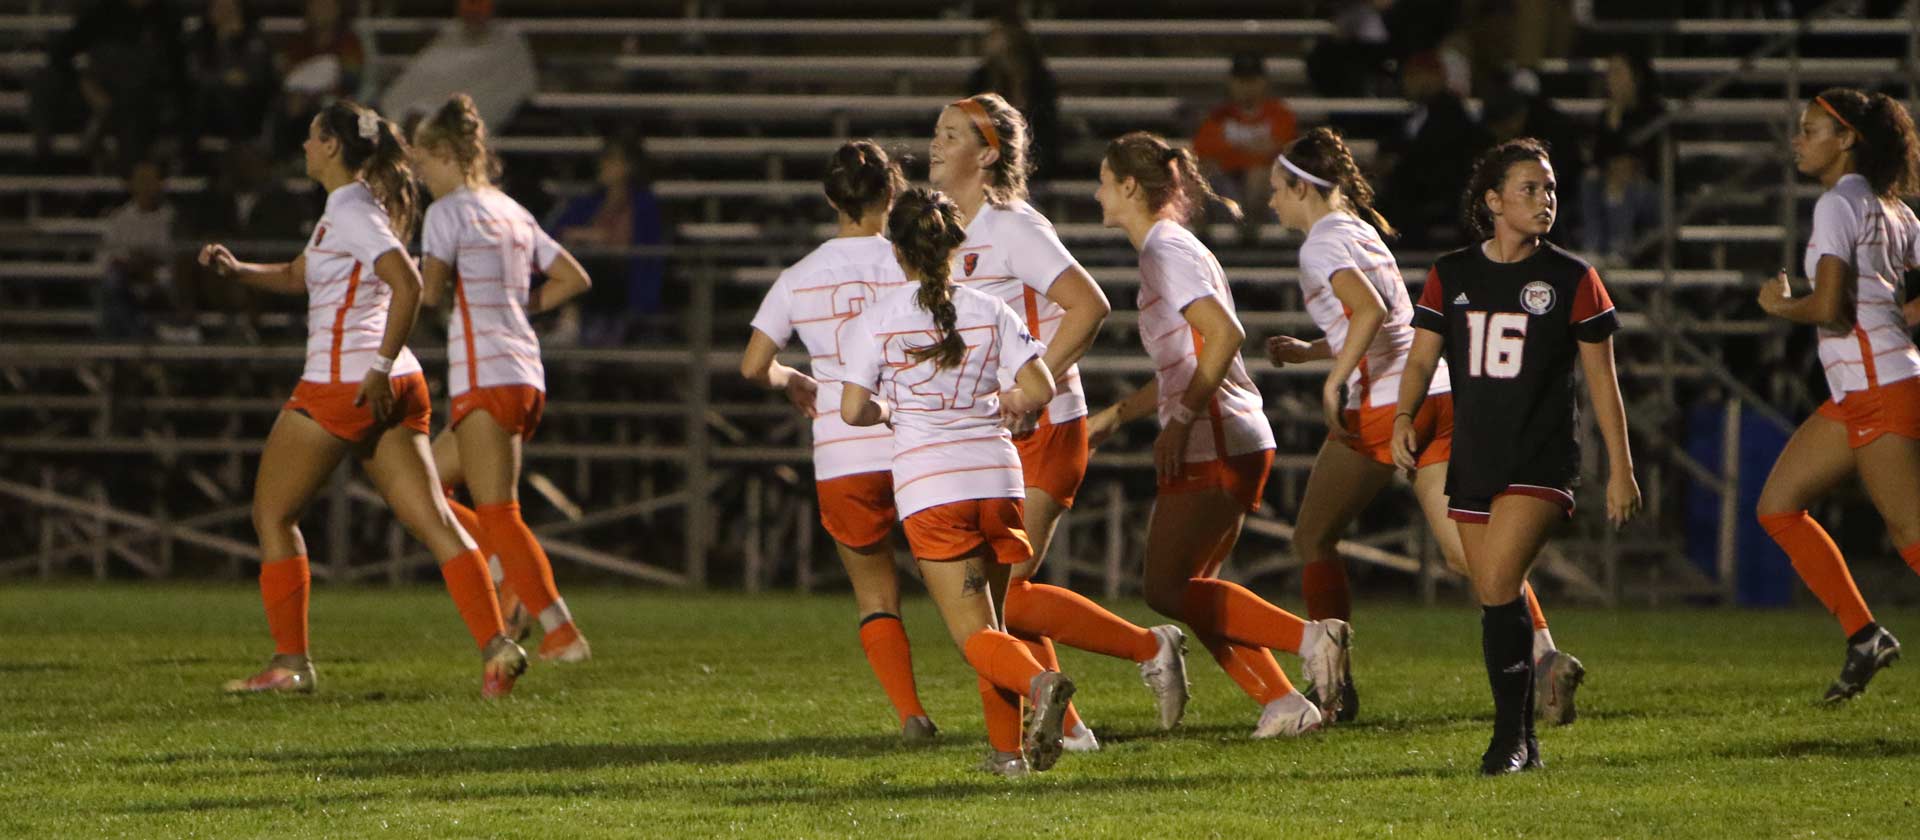 Women's soccer collects 2-0 shut out win over Blackburn